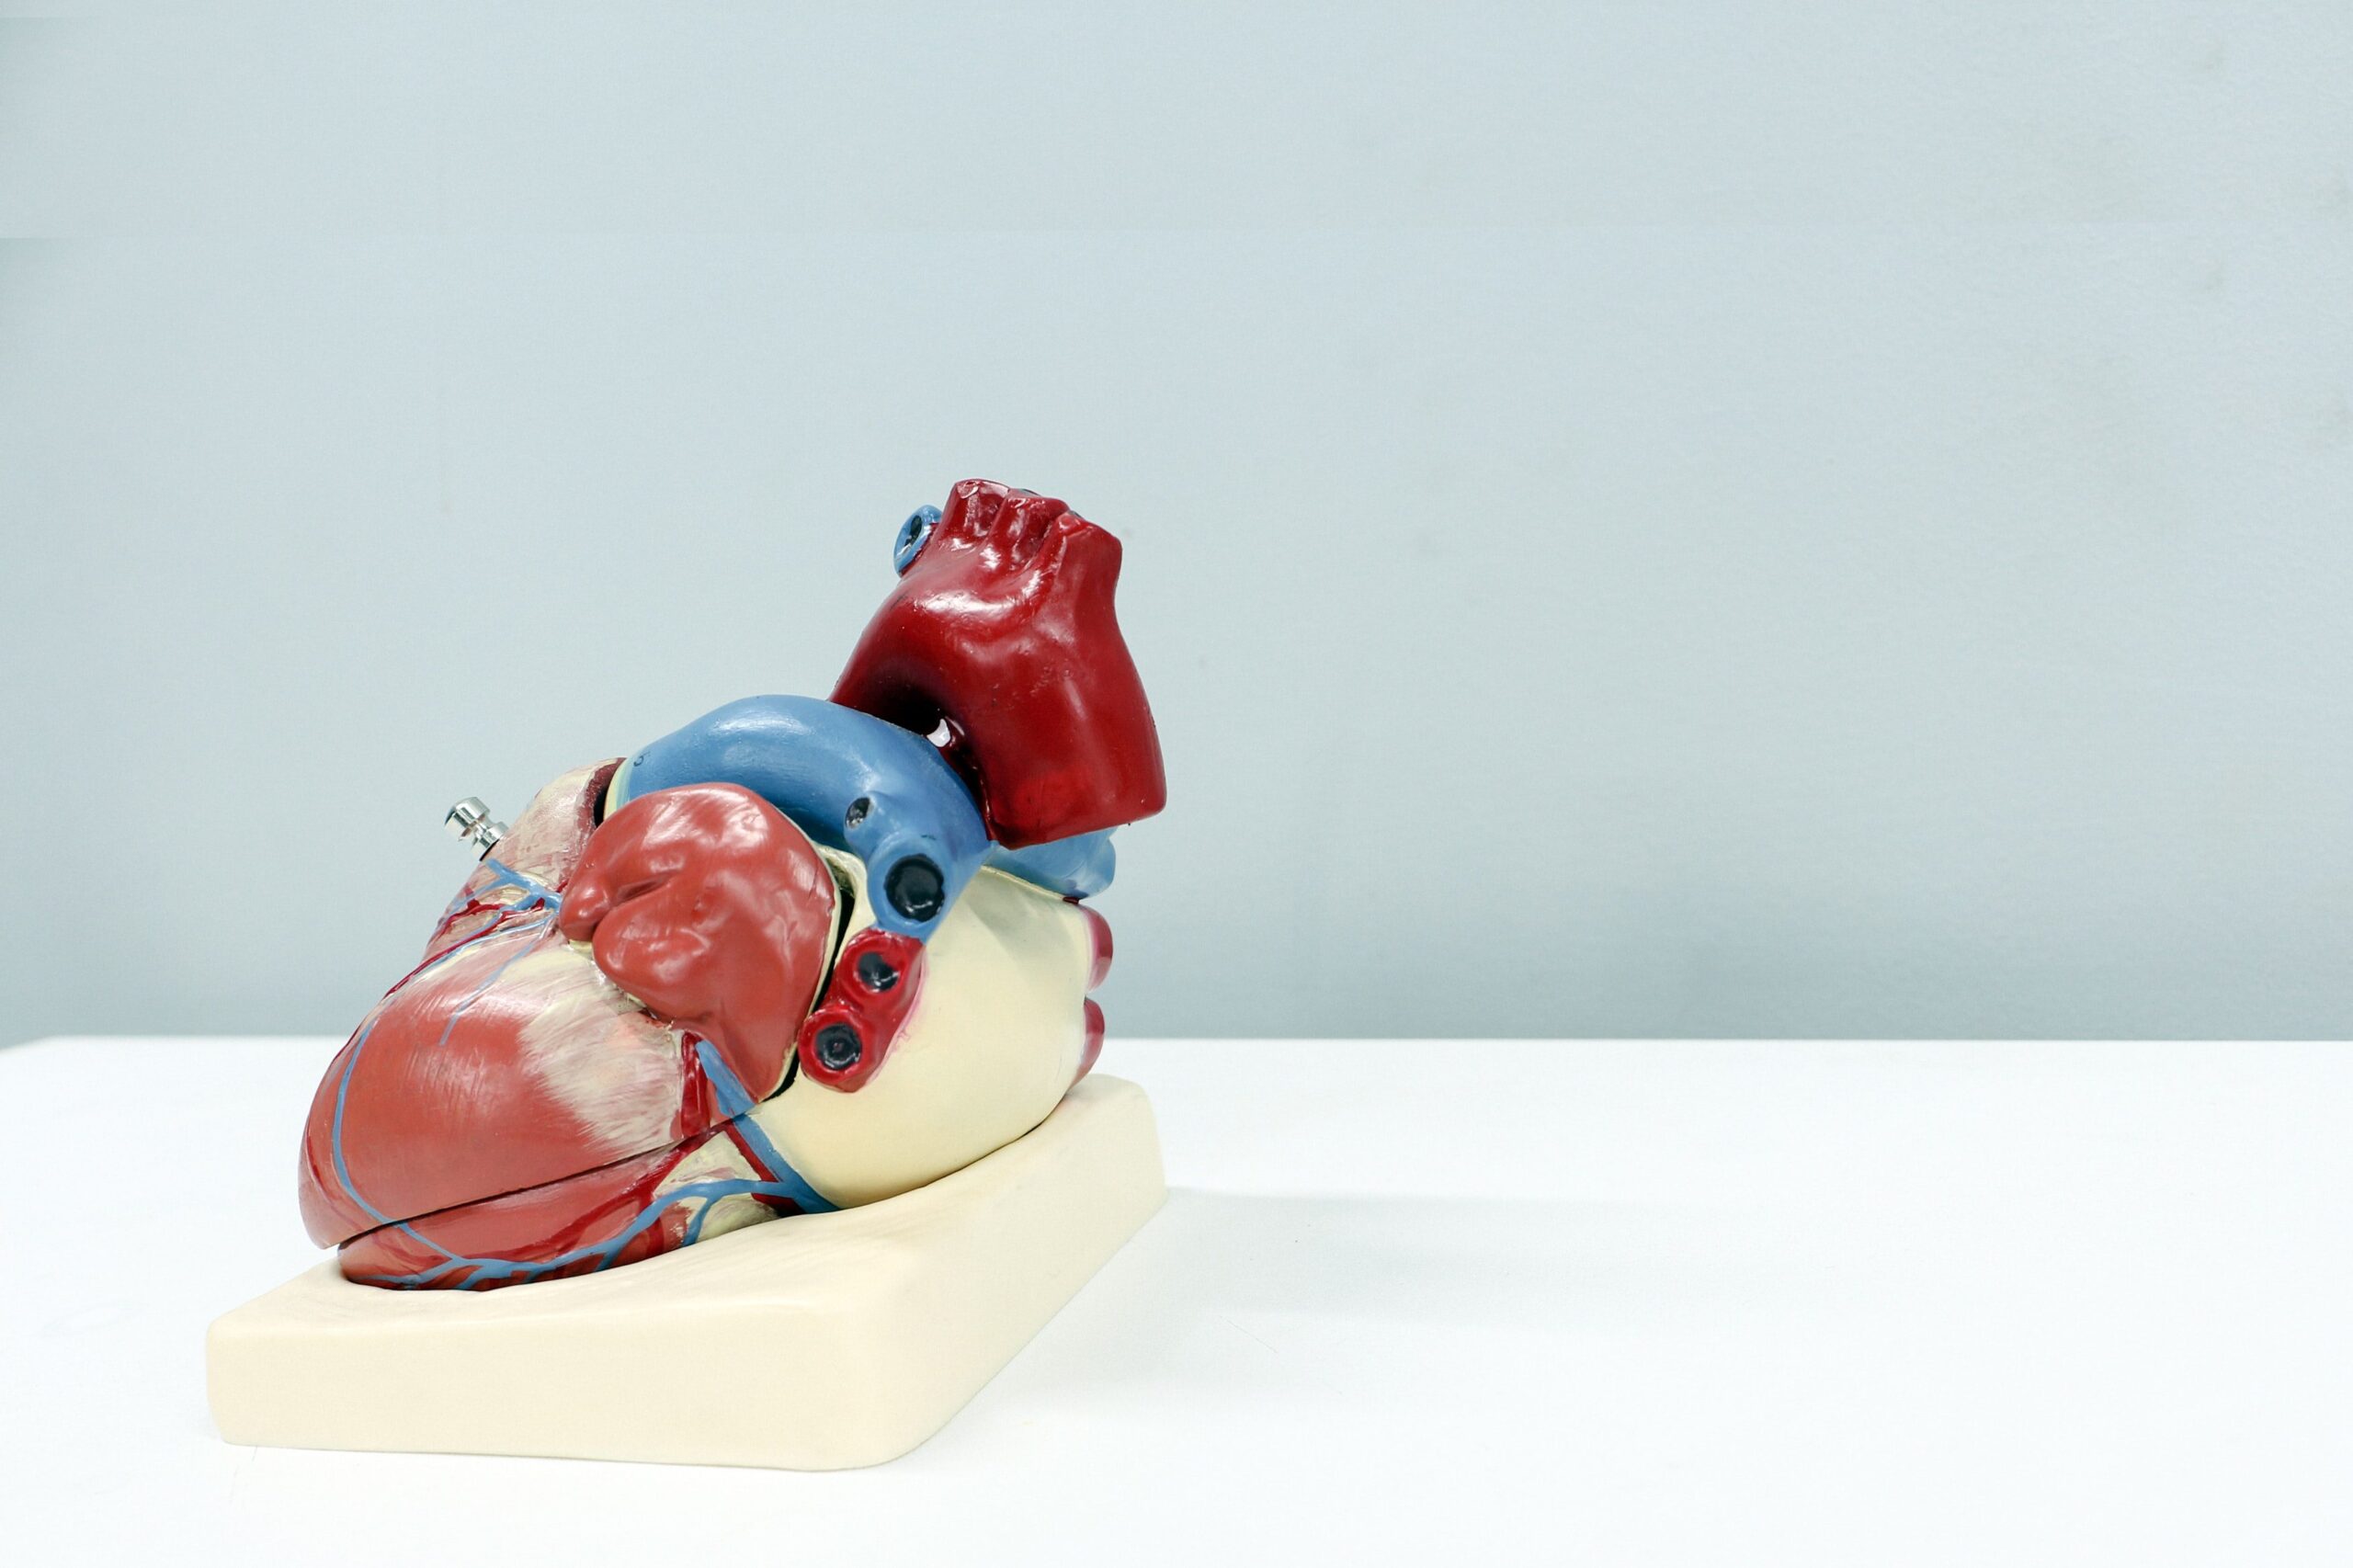 Model human heart on white table and against gray wall